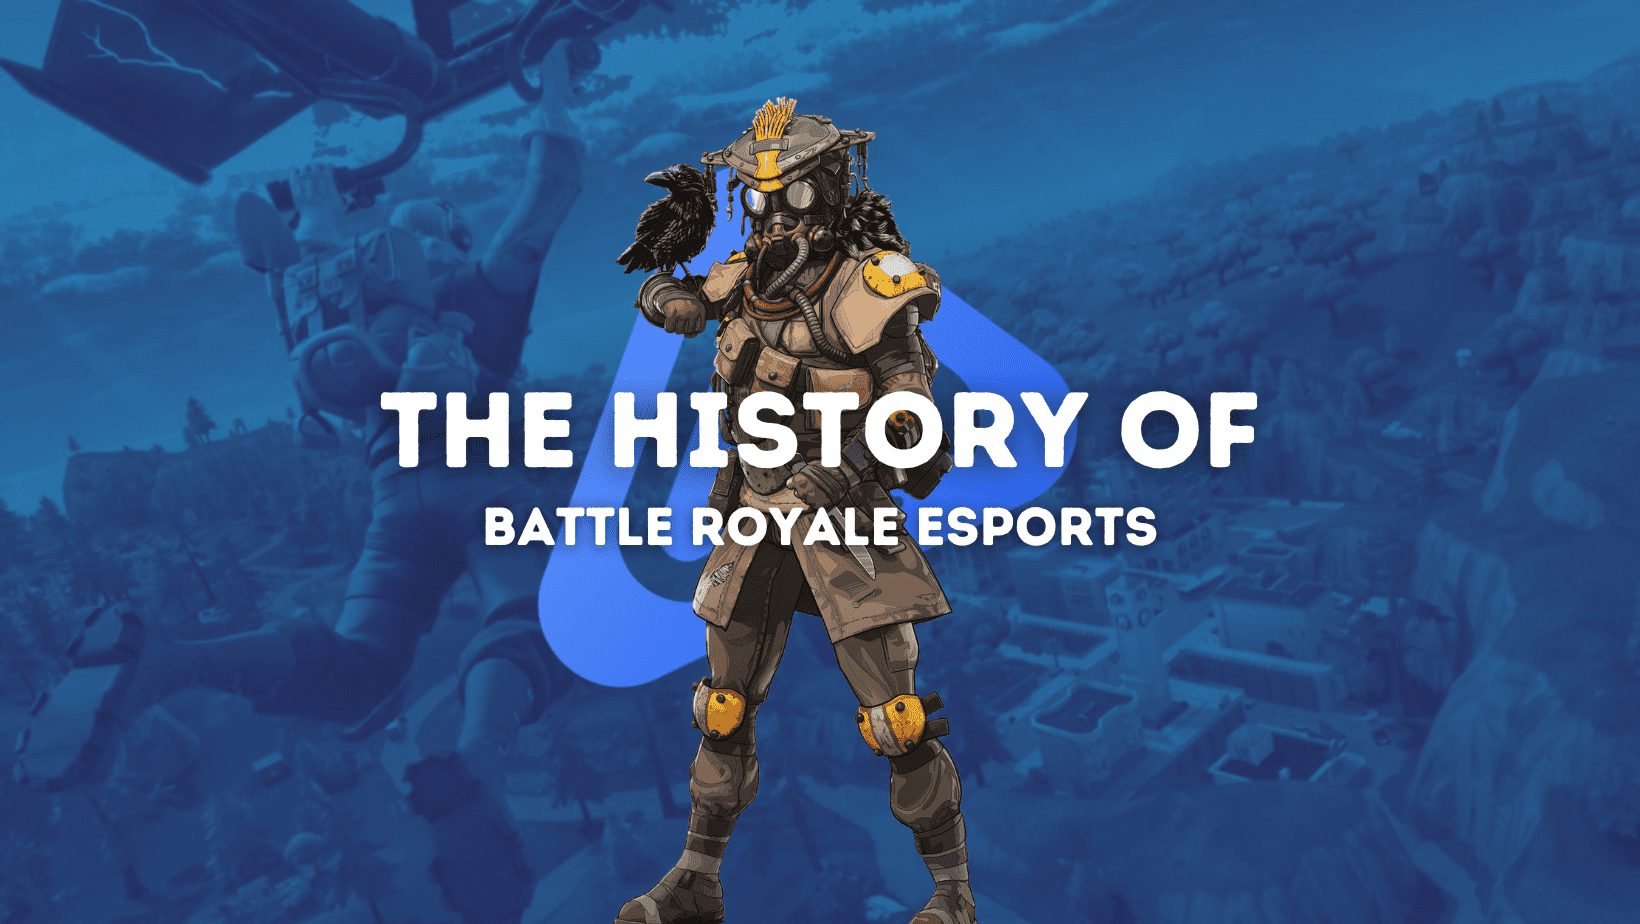 The History of Battle Royale Esports